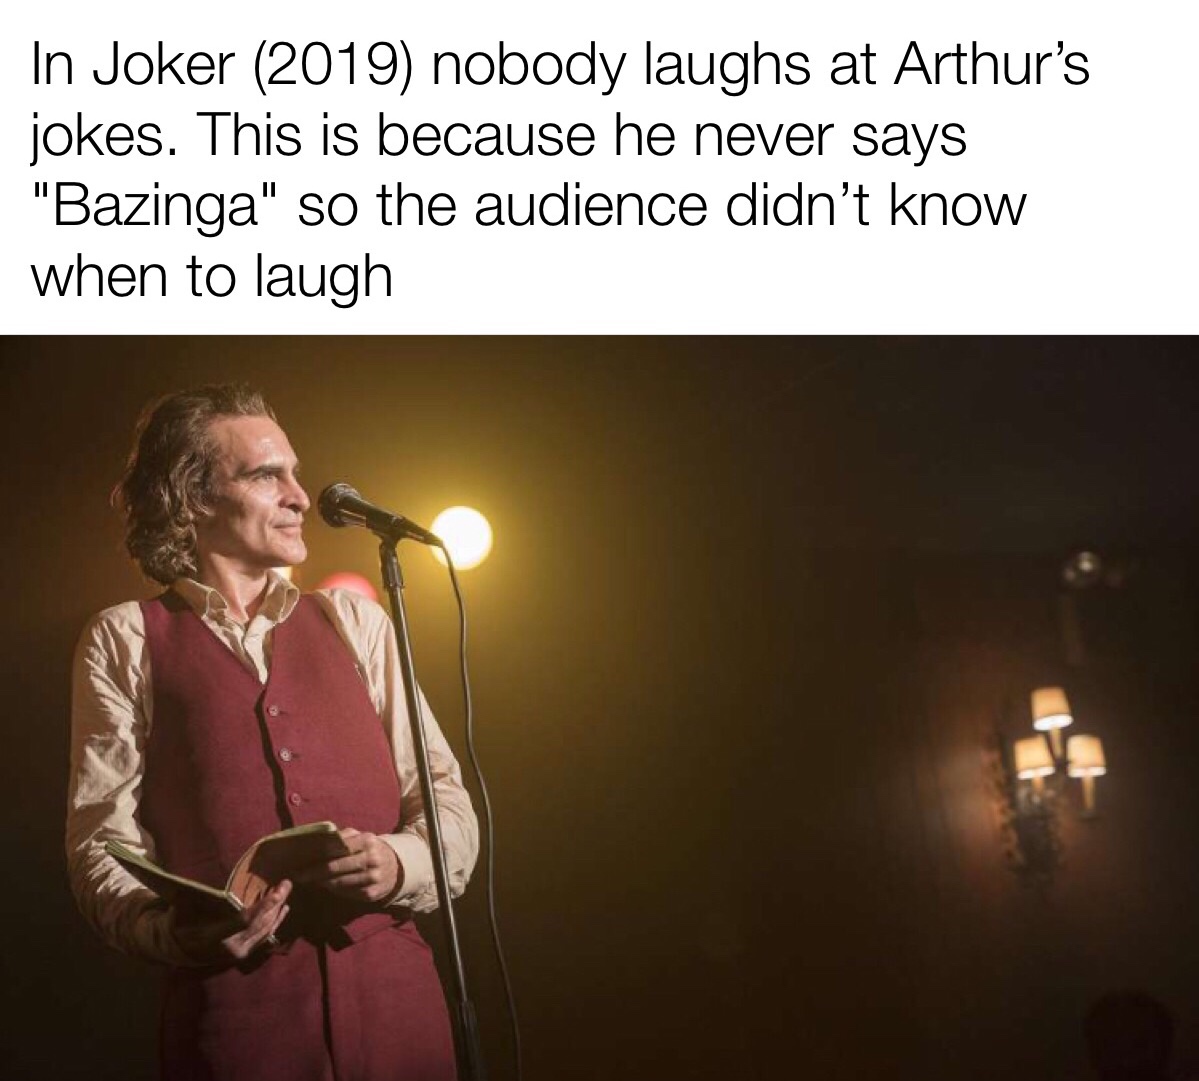 arthur fleck stand up - In Joker 2019 nobody laughs at Arthur's jokes. This is because he never says "Bazinga" so the audience didn't know when to laugh